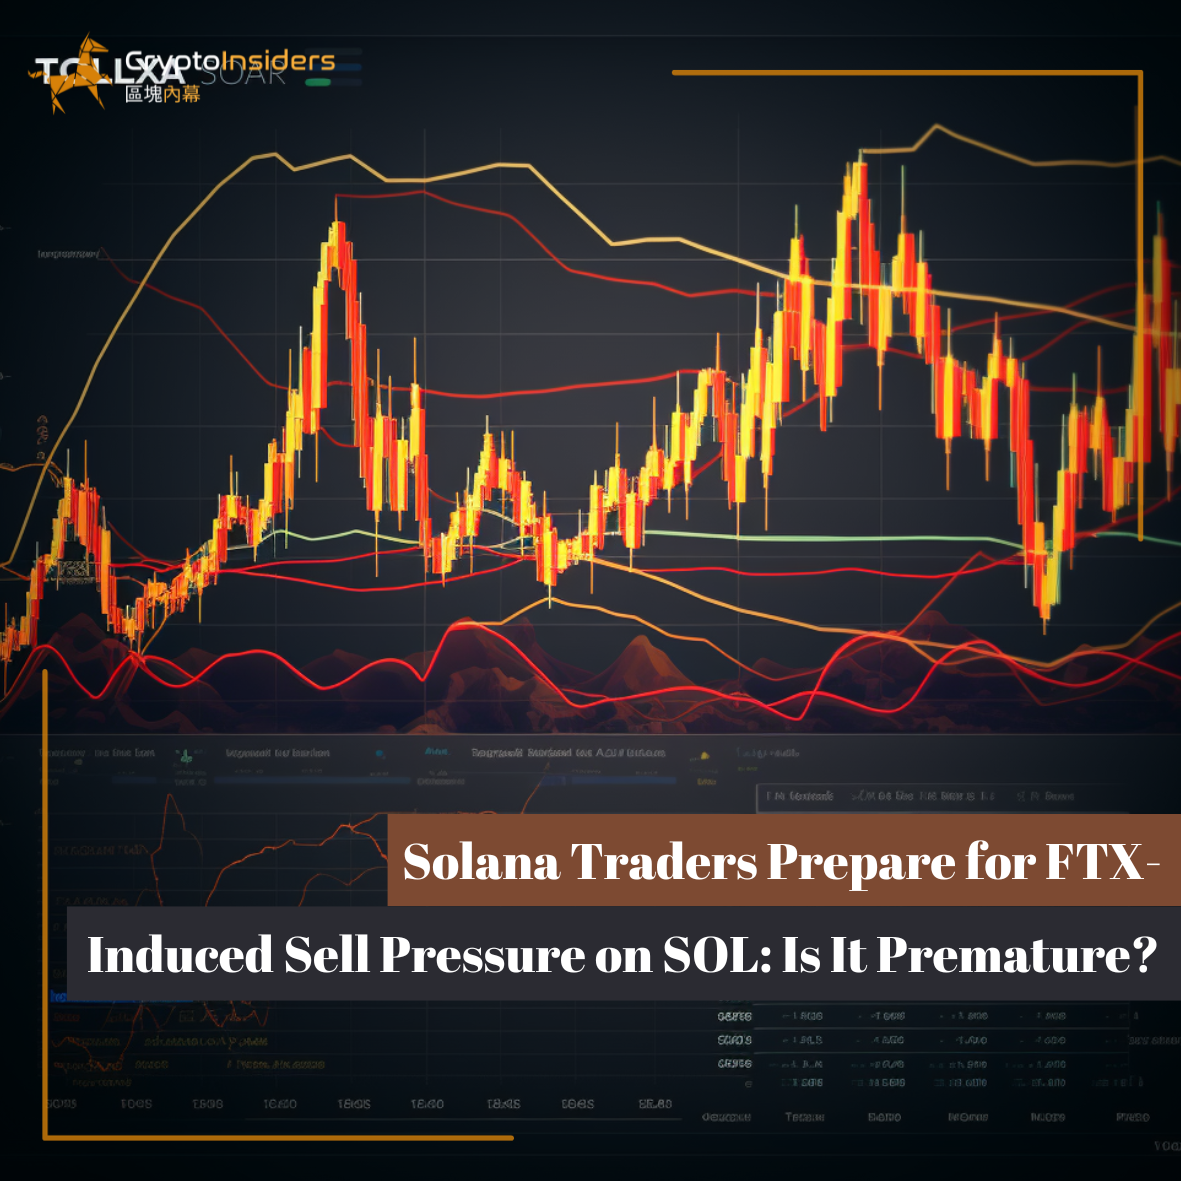 Solana-Traders-Prepare-for-FTX-Induced-Sell-Pressure-on-SOL-Is-It-Premature-Crypto-Insiders-Hong-Kong-Blockchain-News